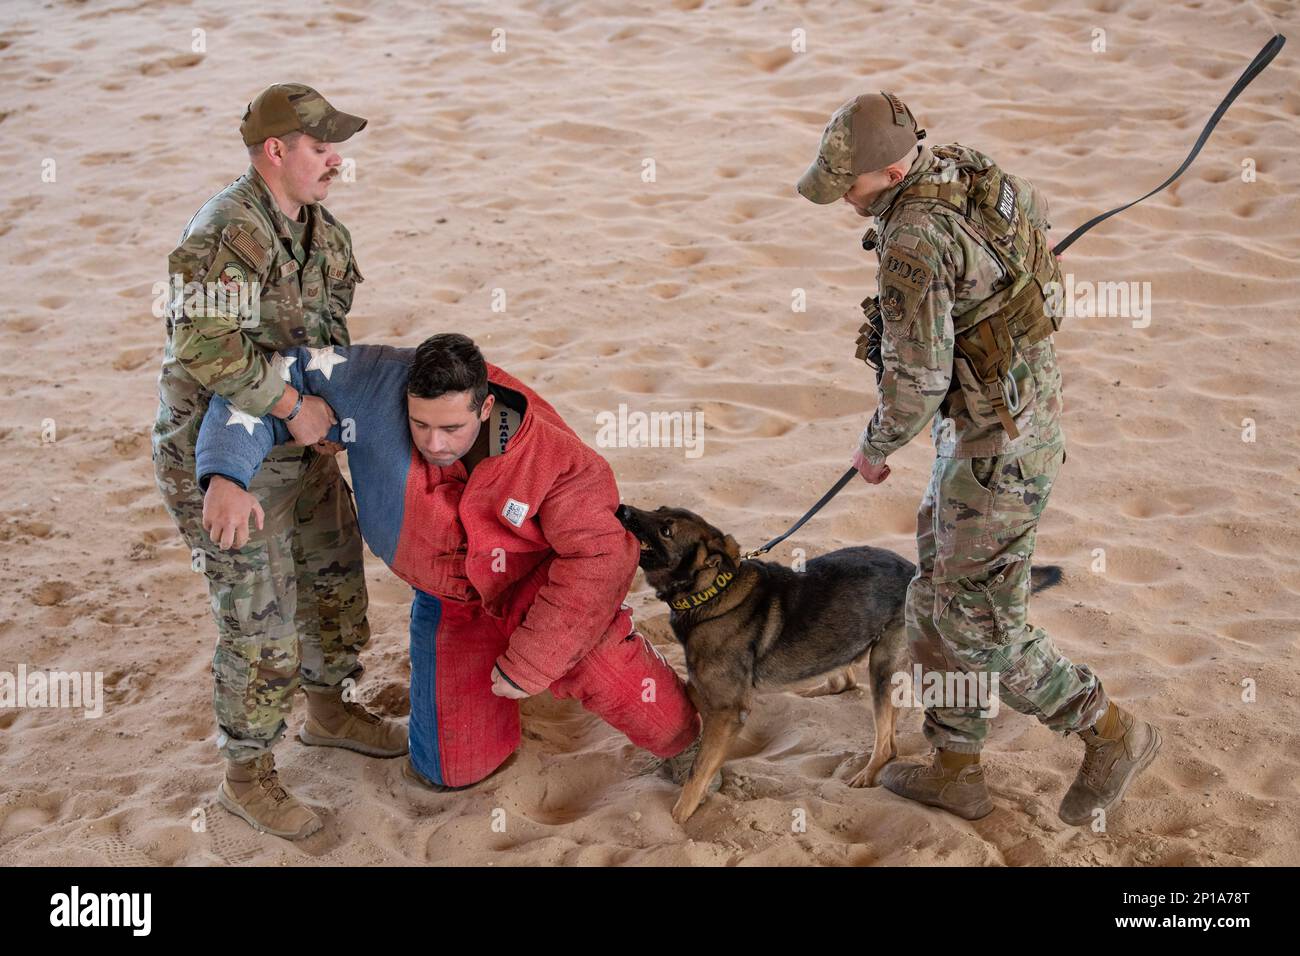 U.S. Air Force Tech. Sgt. Brendan Turner, 386th Expeditionary Security Forces Squadron kennel master, left, helps Cpl. Isaiah Coles, a Canadian Armed Forces member, center, to his feet, while U.S. Air Force Staff Sgt. Jibran Martin, a 386th ESFS Military Working Dog handler, right, gets MWD Mark to release his bite during a MWD bite demonstration at Ali Al Salem Air Base, Kuwait, Feb. 16, 2023. The MWDs at AASAB are dual purpose detection and patrol dogs and AASAB is the largest hub for sending MWDs in and out of U.S. Central Command’s area of responsibility. The 386th ESFS does demonstrations Stock Photo